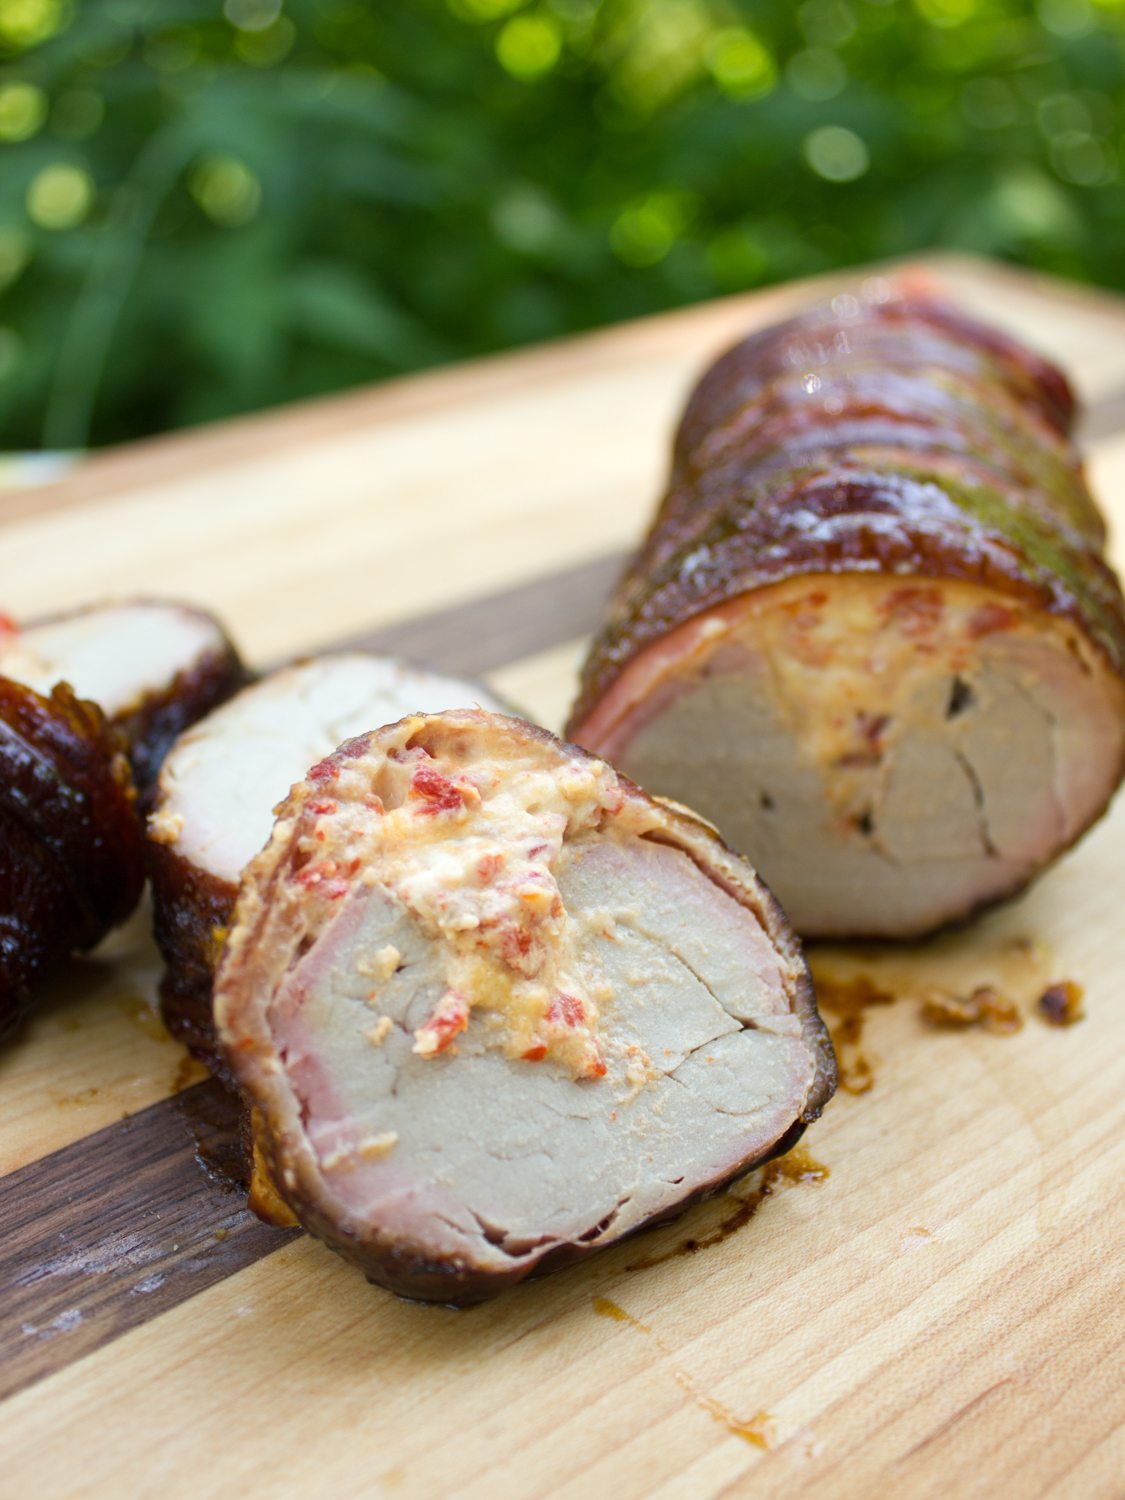 Bacon wrapped smoked pork tenderloin with roasted red pepper and cheese stuffing